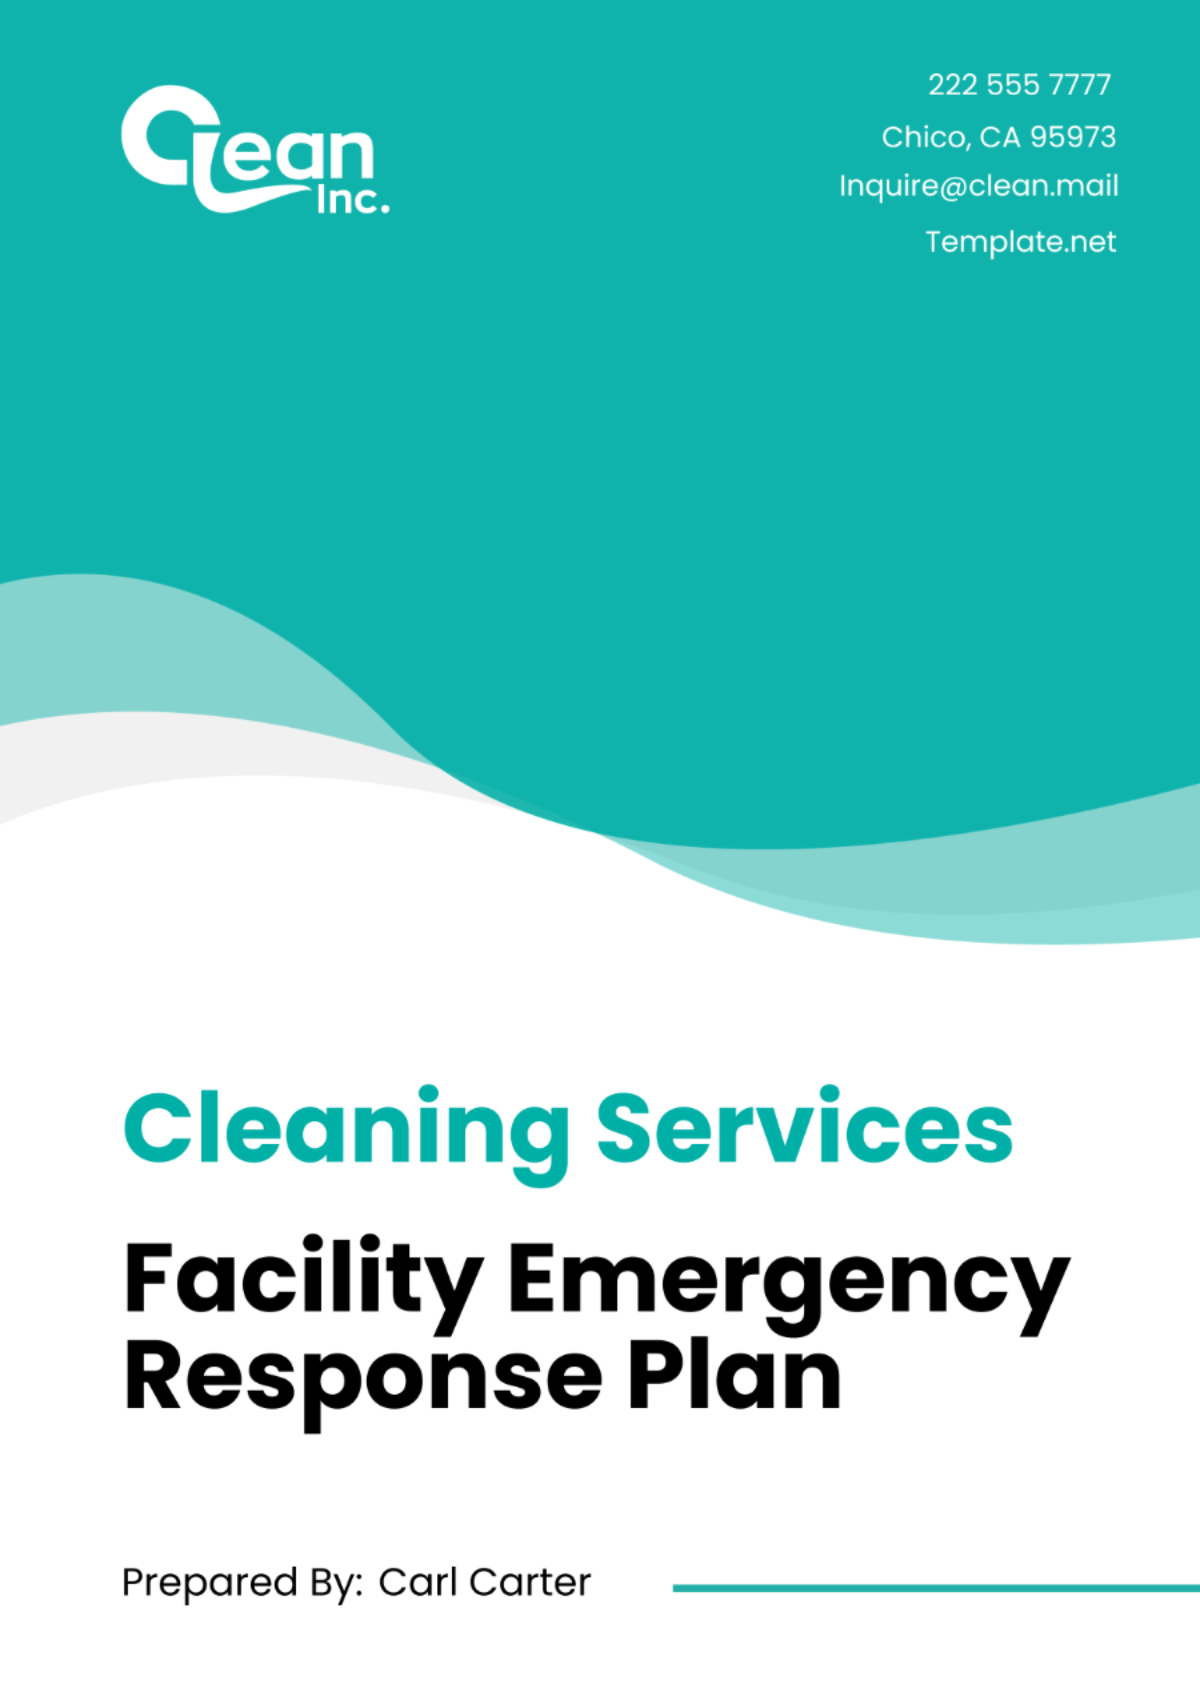 Cleaning Services Facility Emergency Response Plan Template